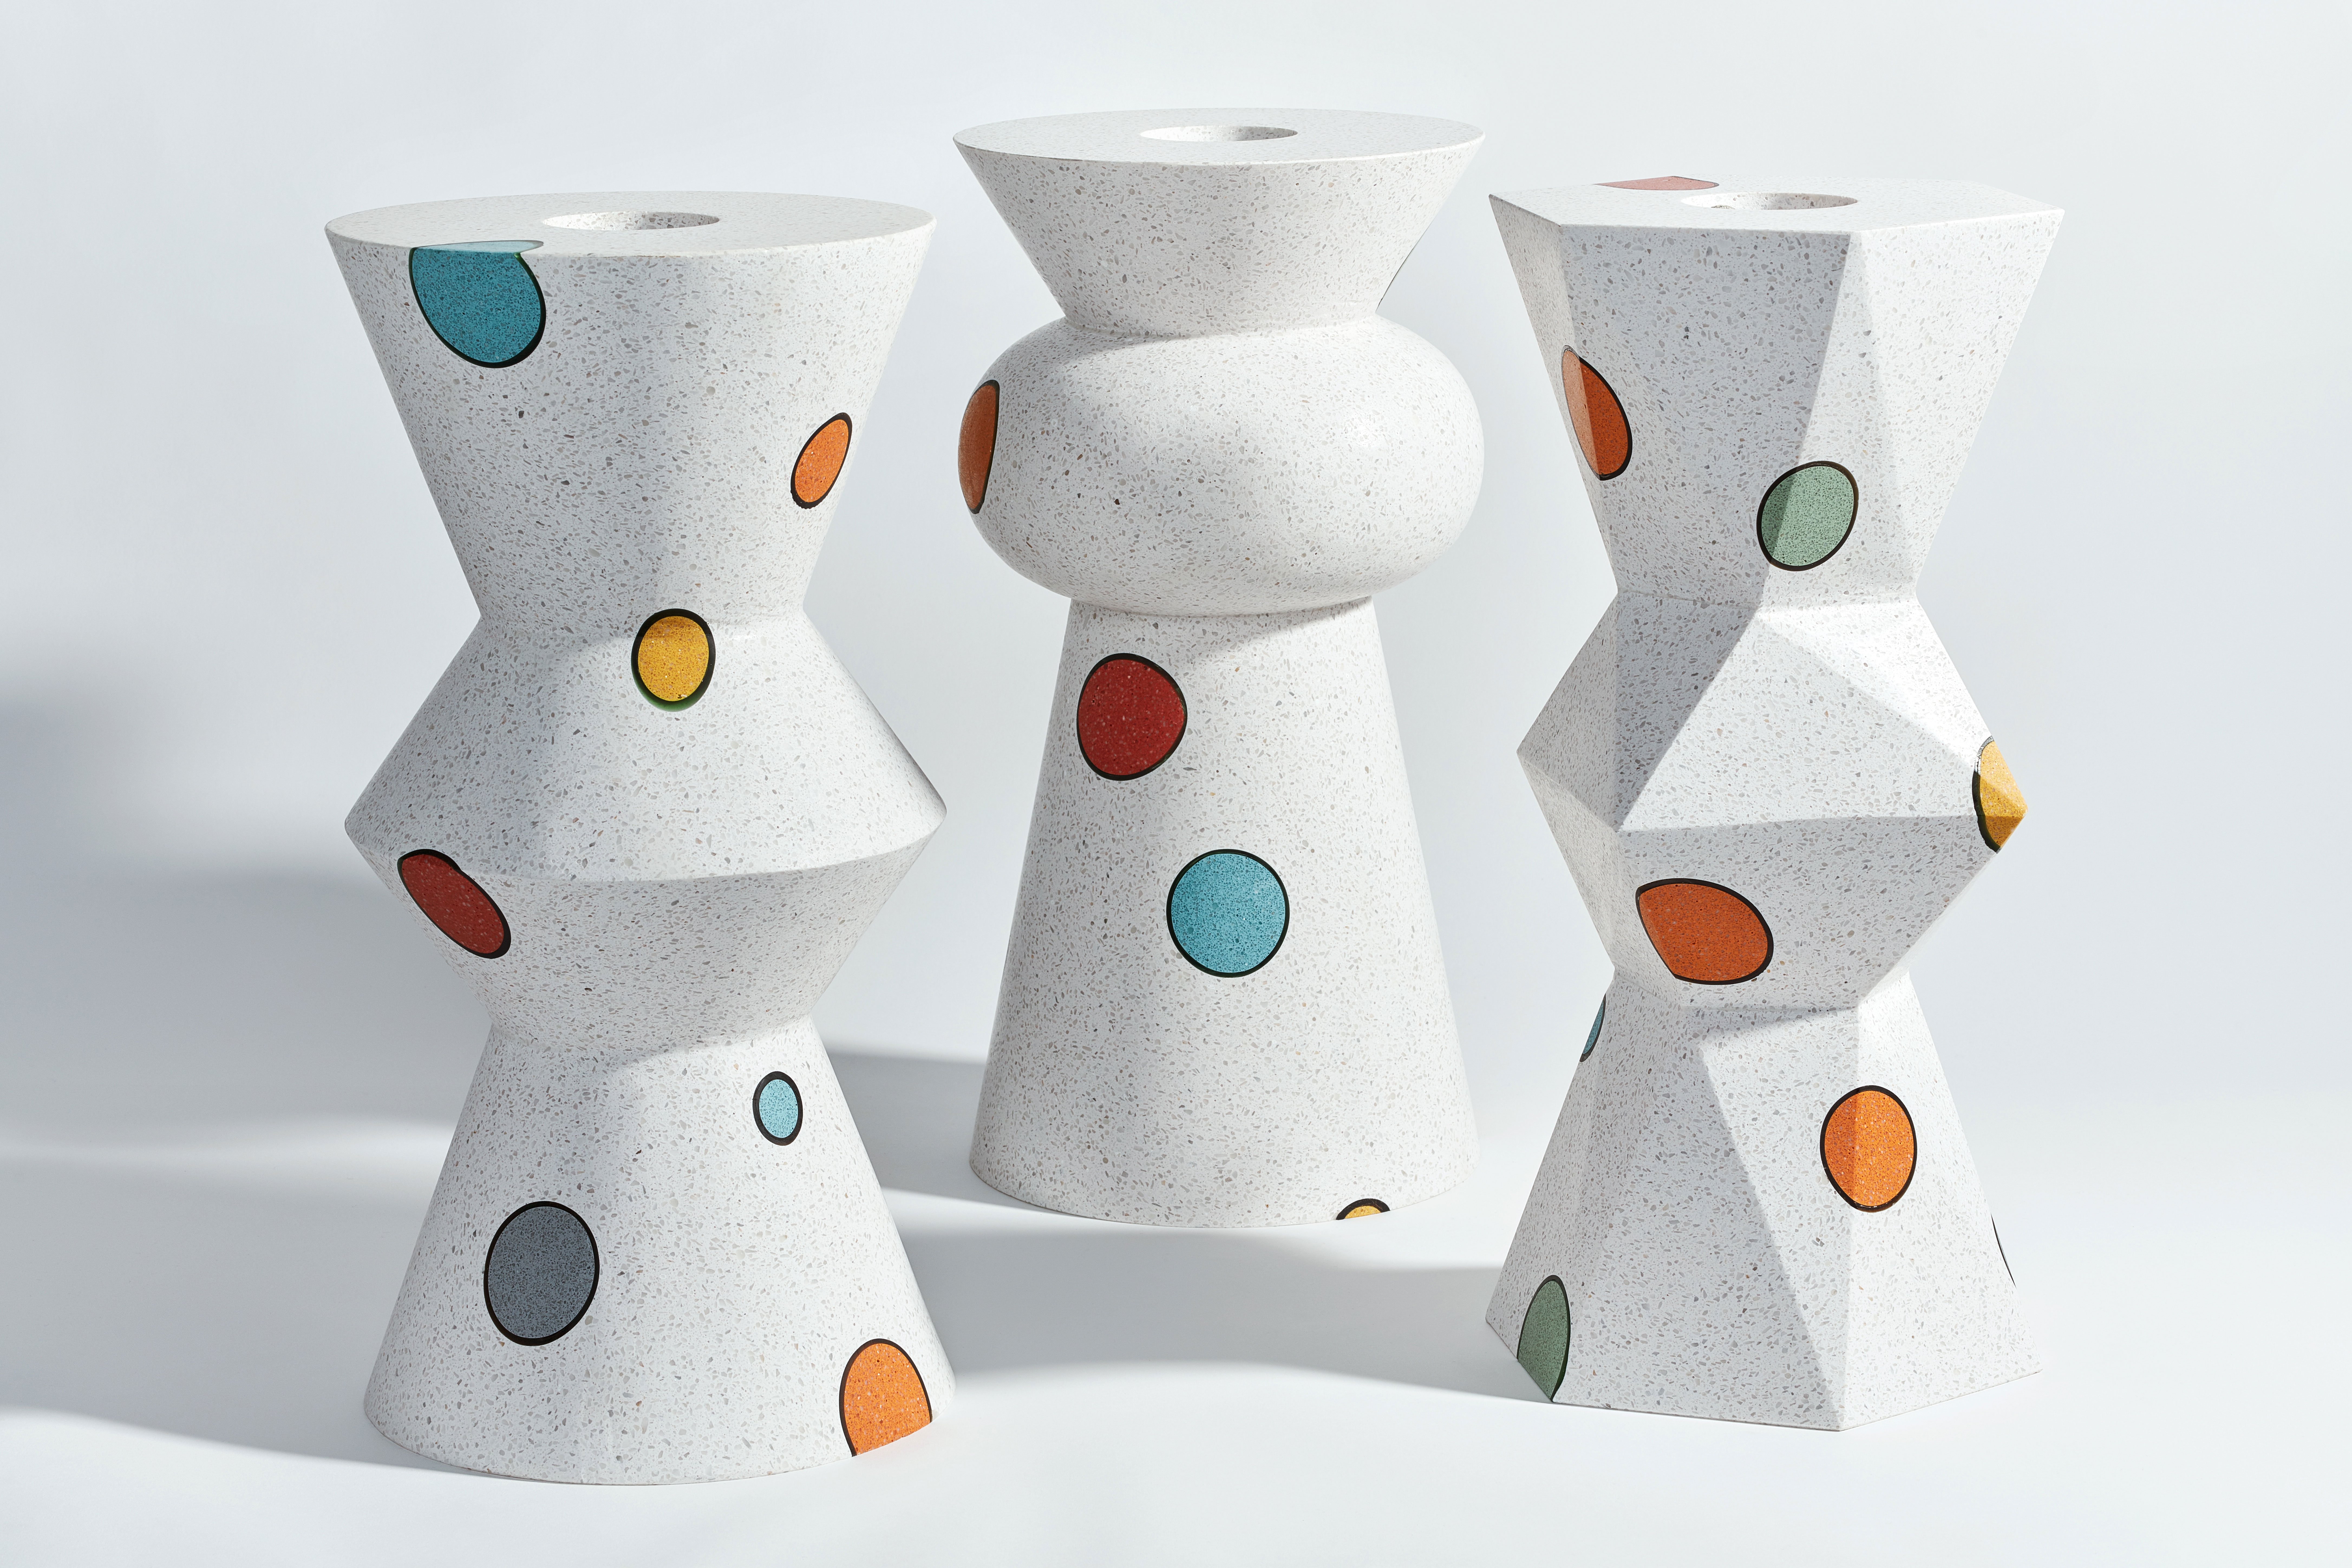 Alhambra collection vases. Photo: Courtesy of Acdo